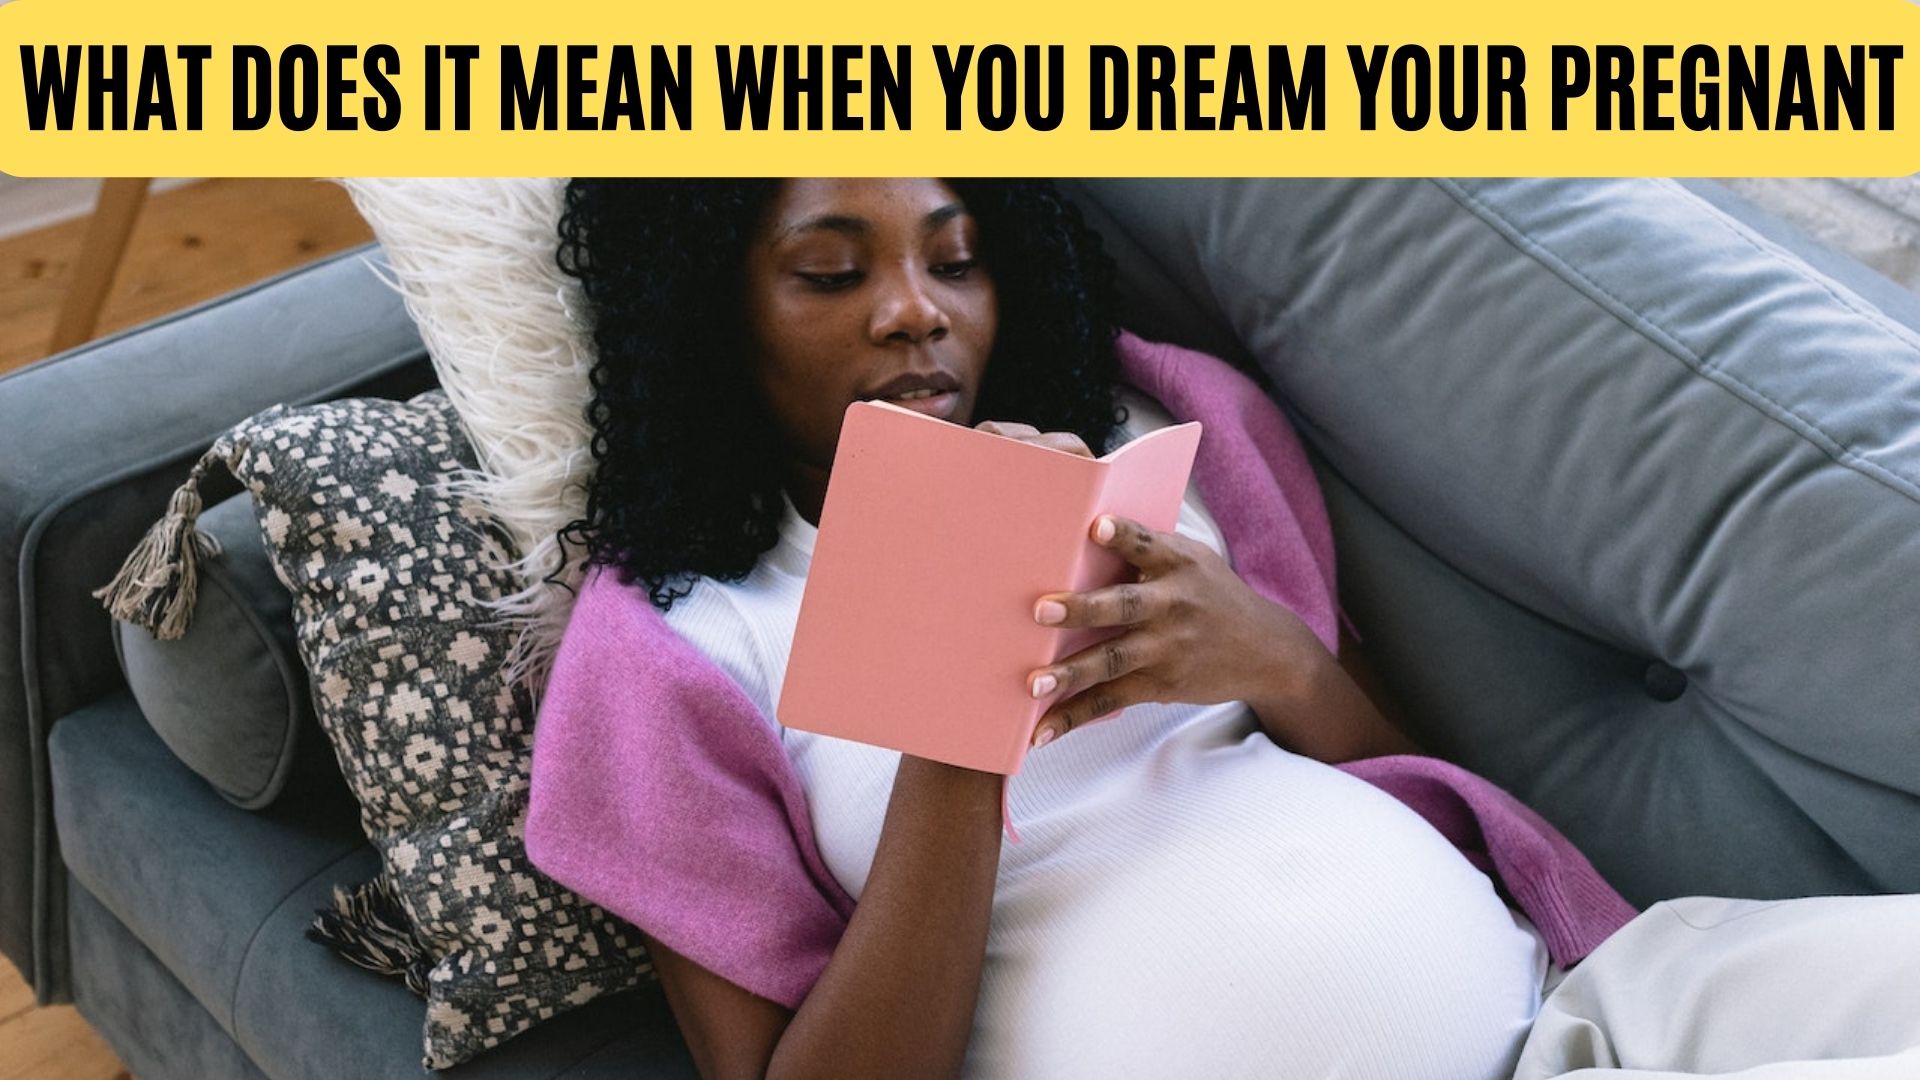 What Does It Mean When You Dream Your Pregnant?